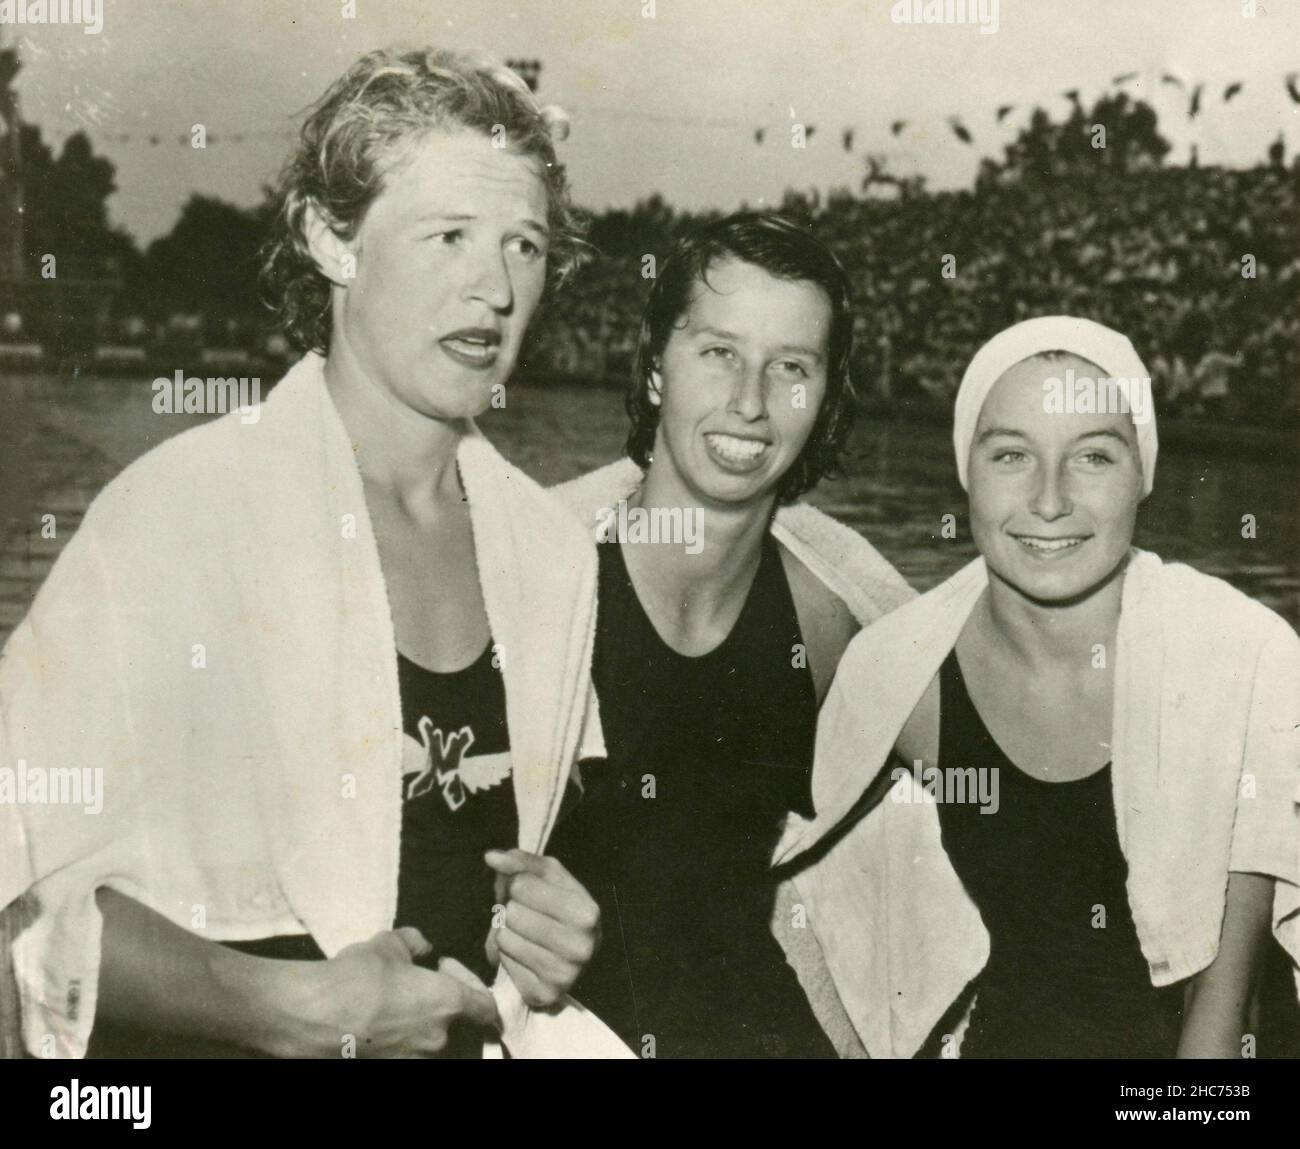 US Swimmers competing in the 1948 Olympic Games, from left: Suzanne Zimmerman, Muriel June Mellow, and Barbara Jensen, USA 1948 Stock Photo